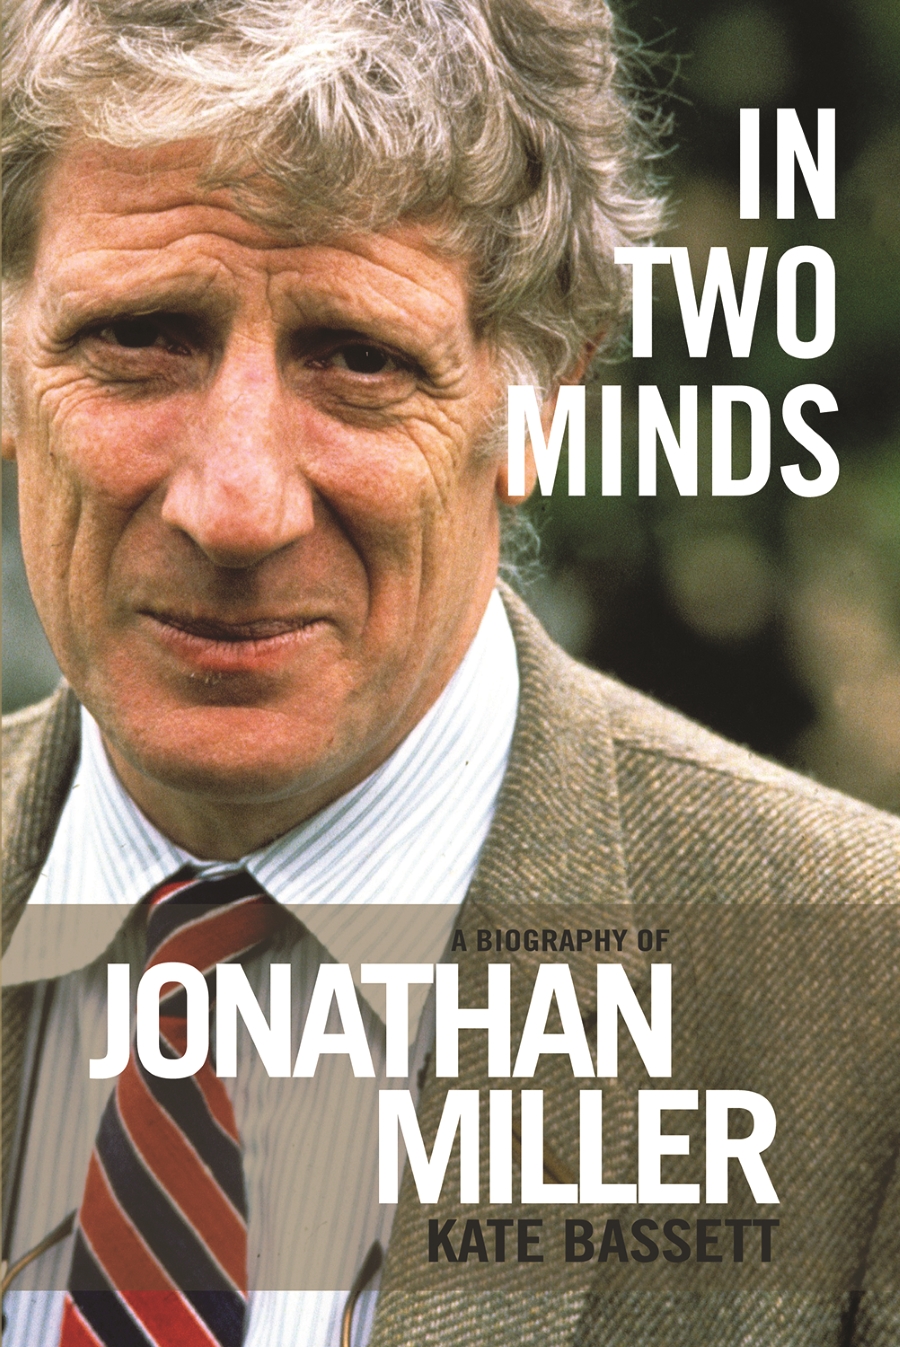 "In Two Minds" by Jonathan Miller.